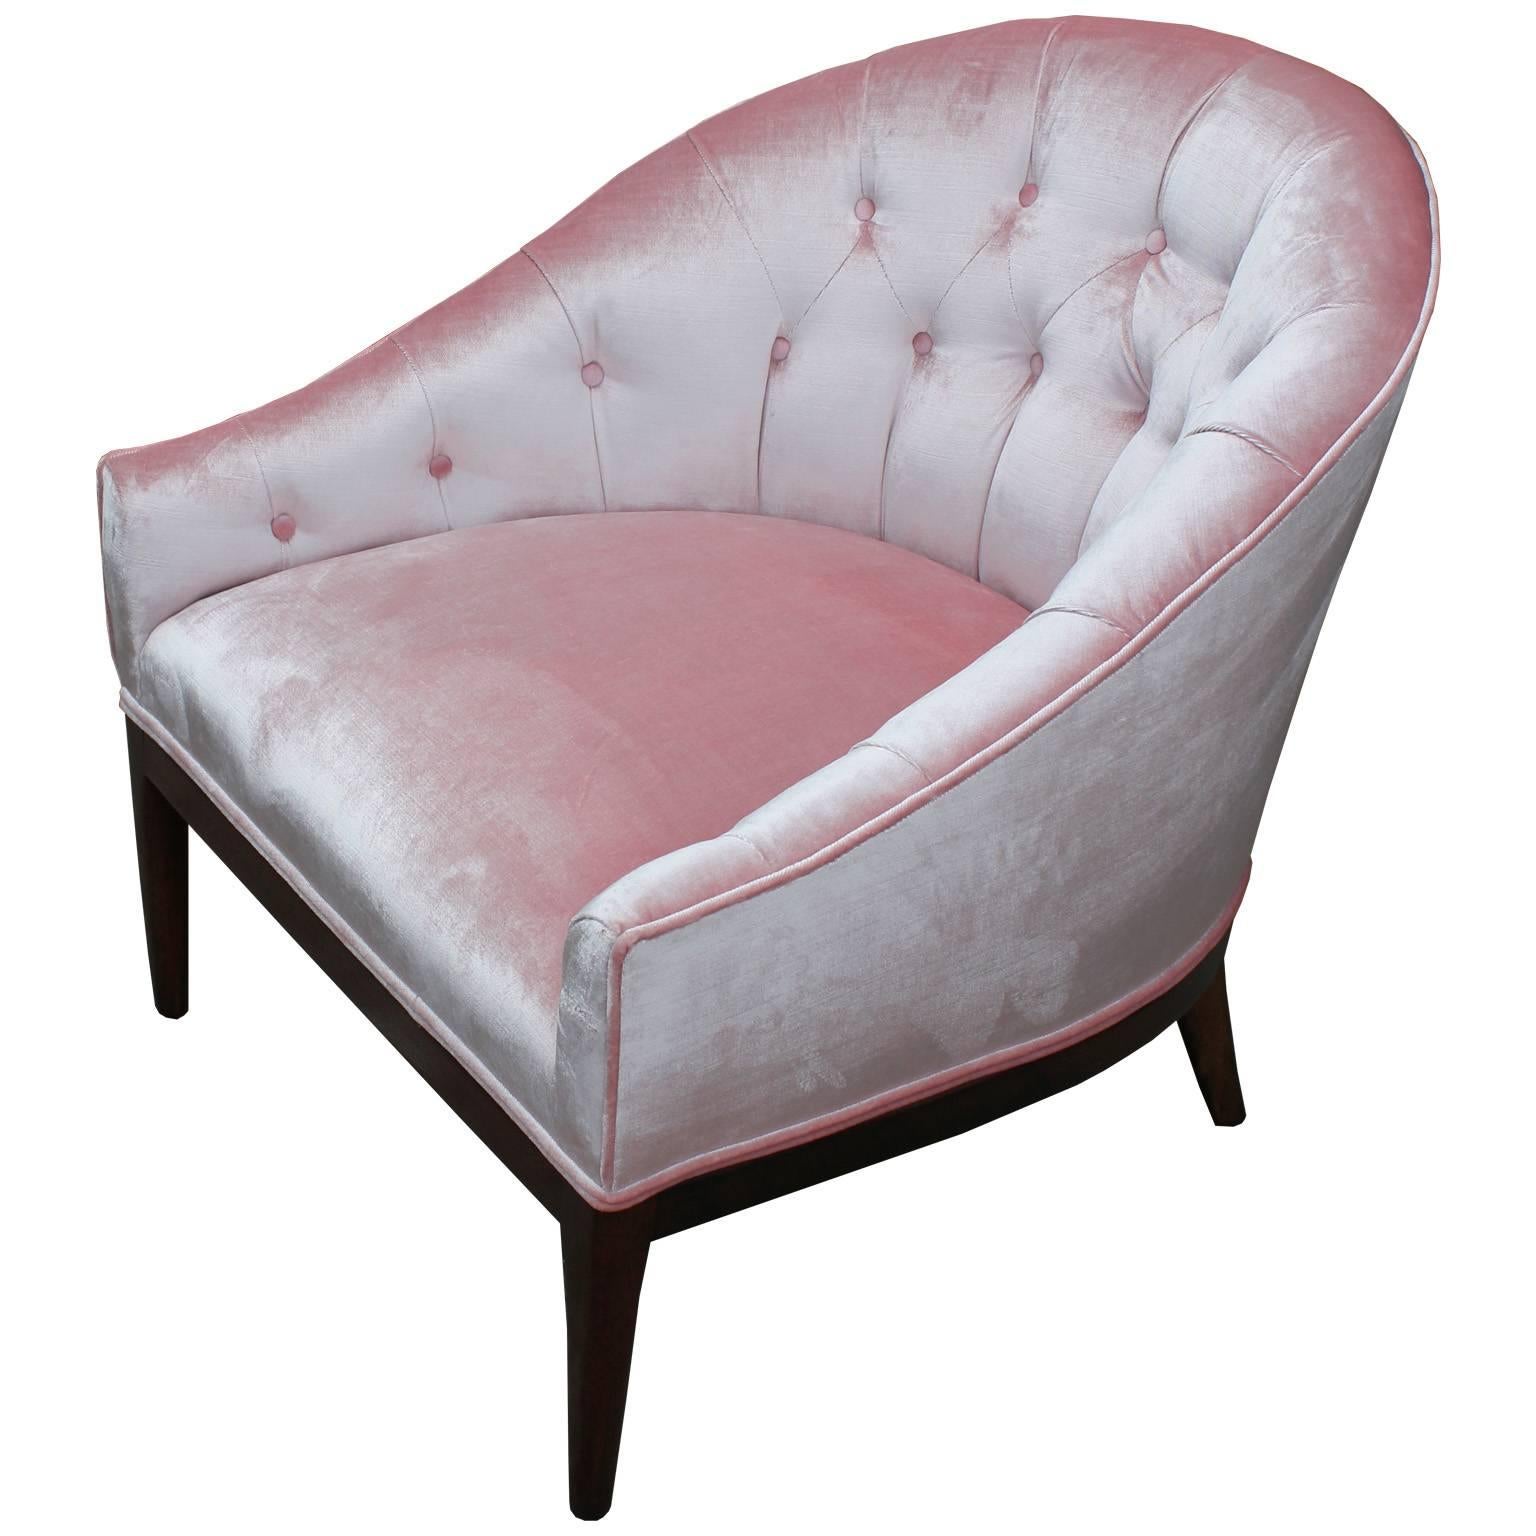 Mid-Century Modern Luxe Pair of Modern Tufted Barrel Back Chairs in Ballet Pink Velvet and Walnut